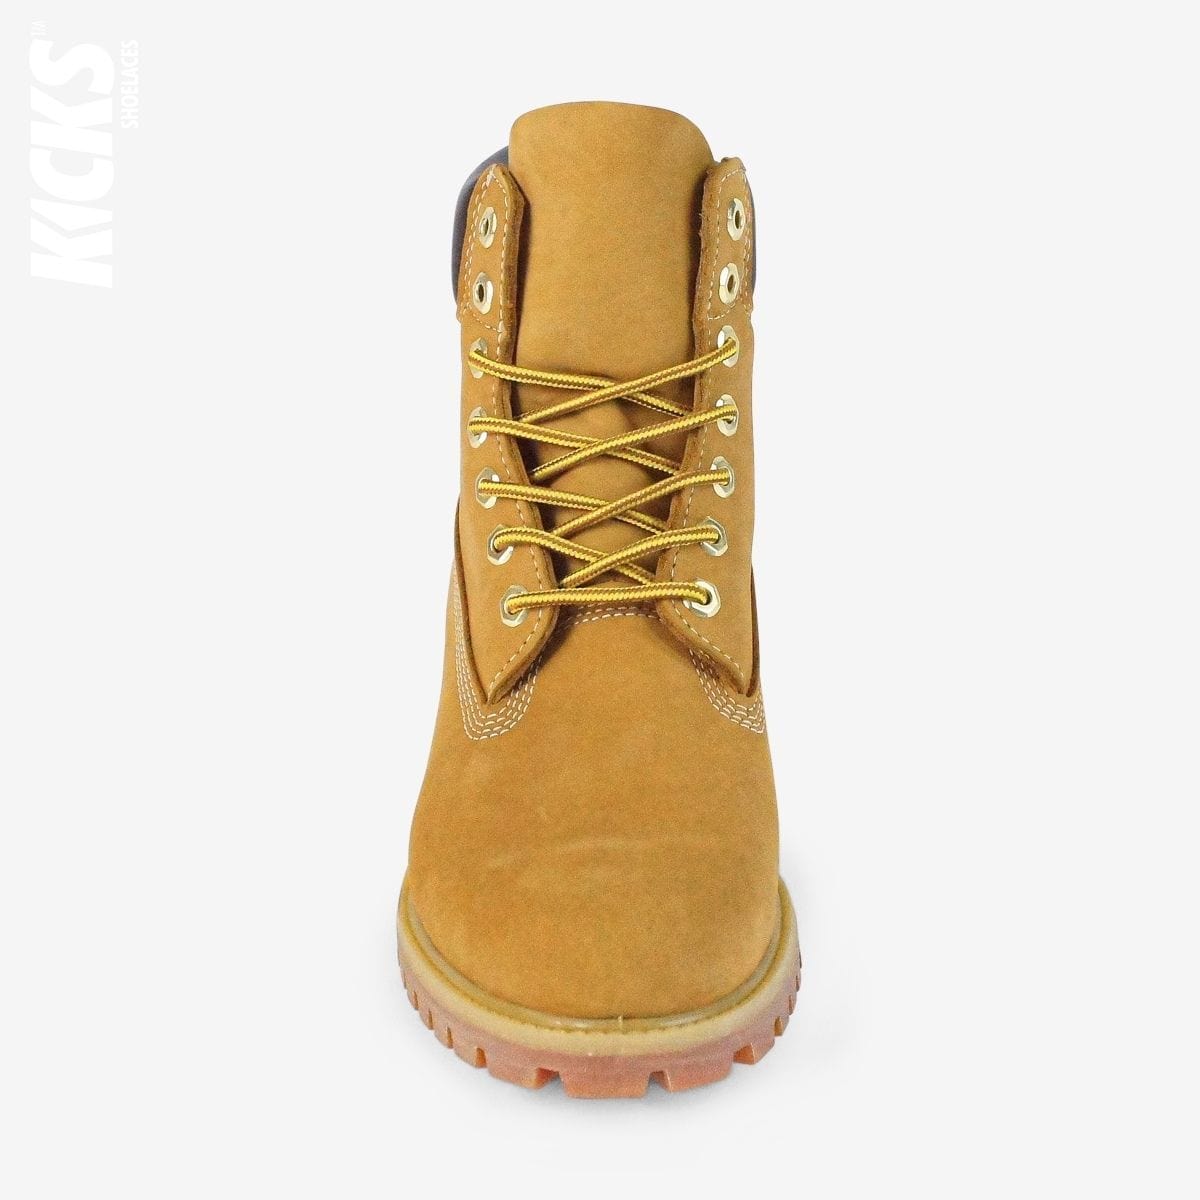 golden-yellow-and-brown-boot-laces-for-adult-kids-unisex